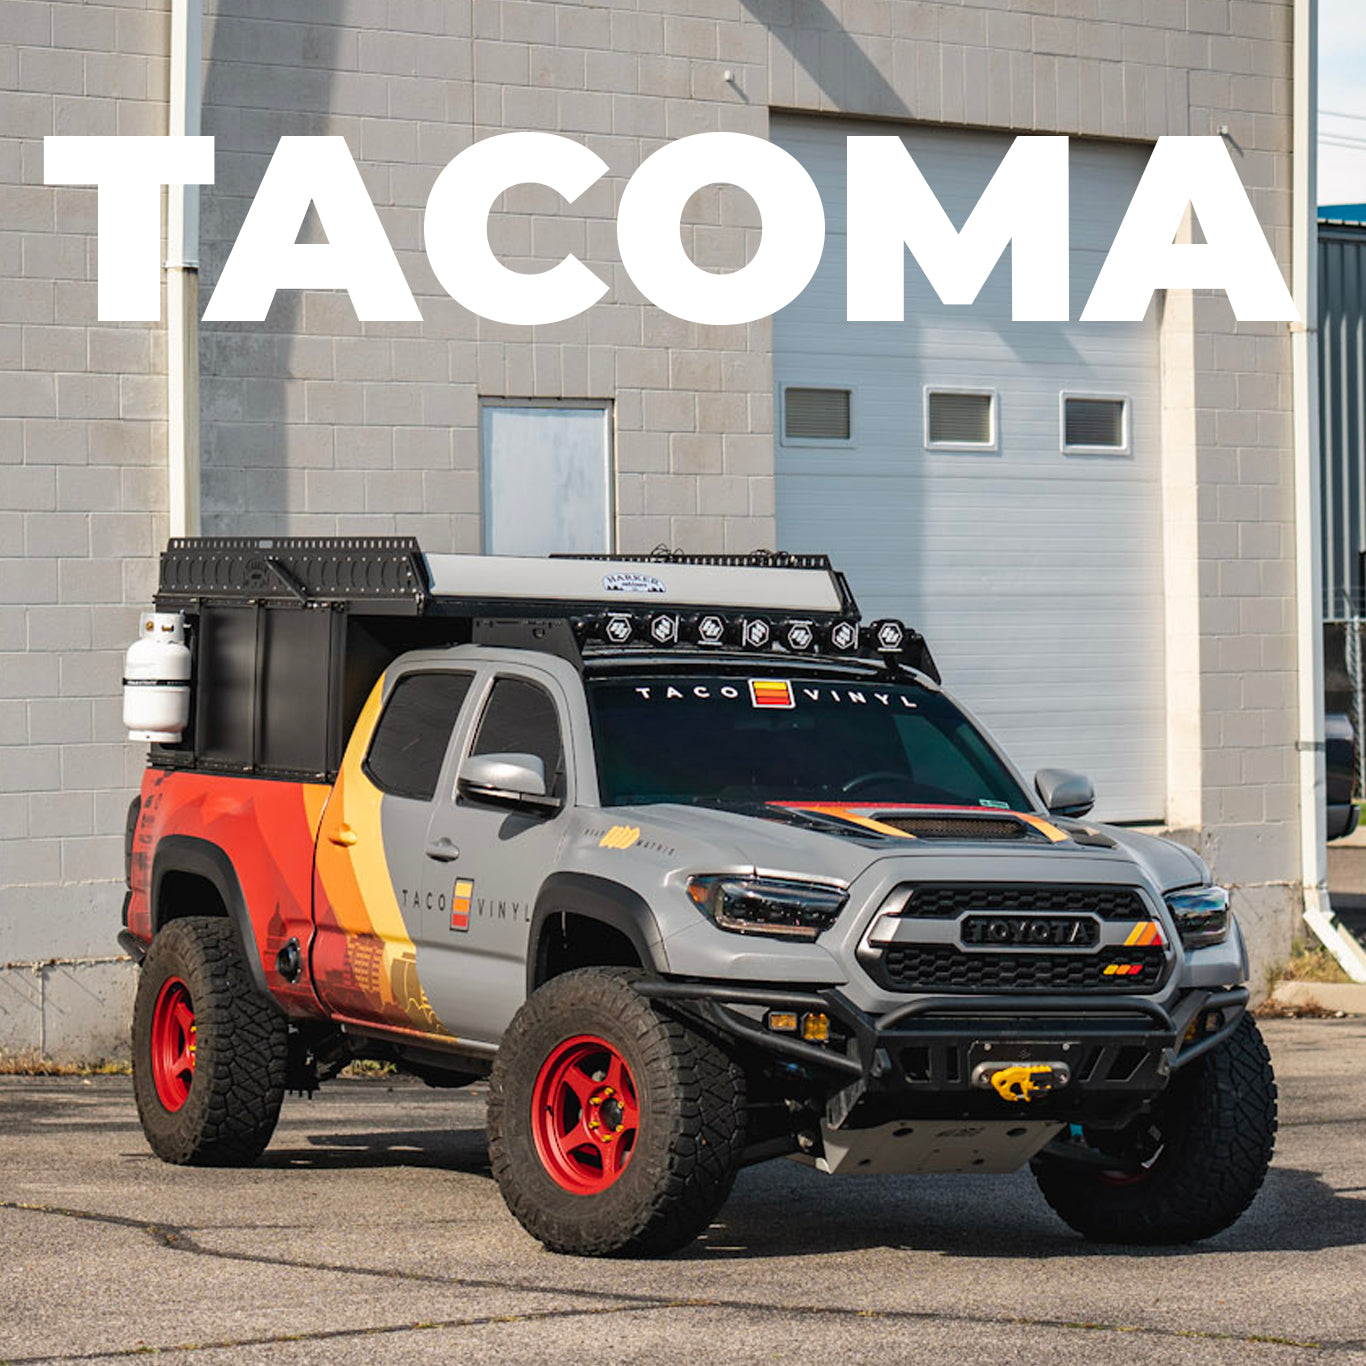 TOYOTA TACOMA OVERLAND TORQUE TUNE – ENHANCE YOUR TACOMA DRIVING EXPERIENCE